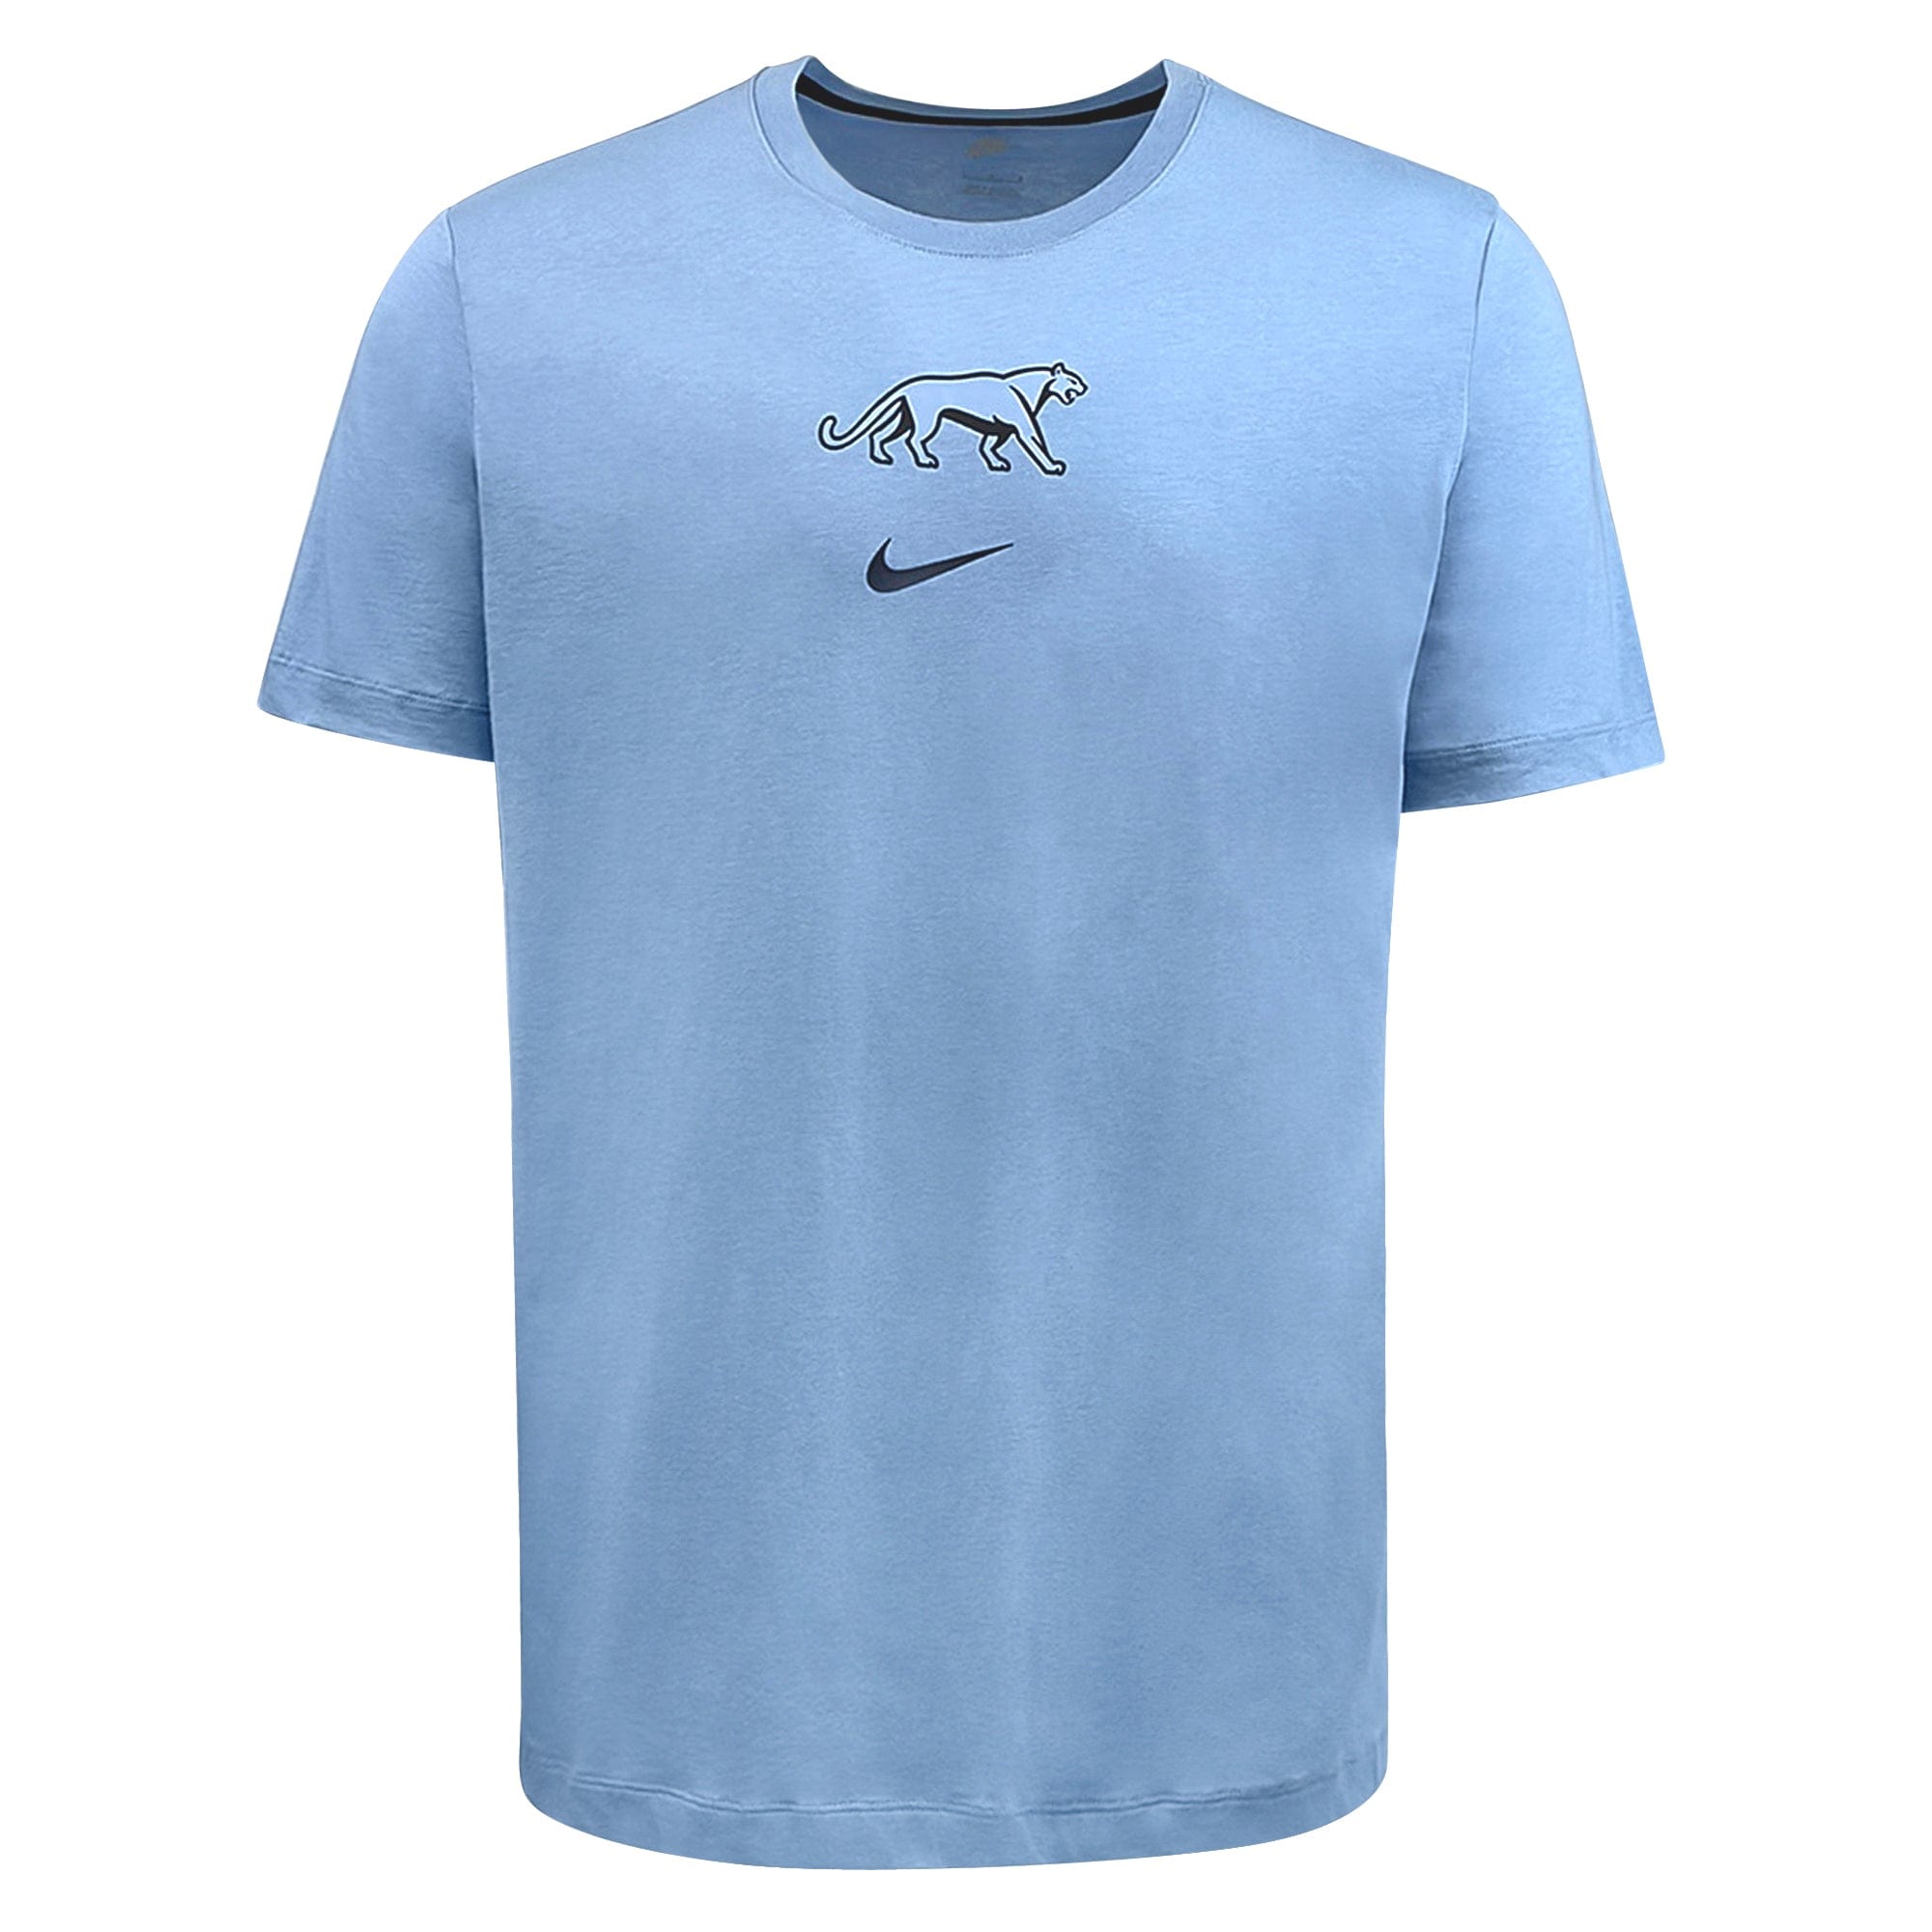 by Pumas Rugby Tee Rugby World Shop | - T-shirt 23/24 Nike Argentina Cotton